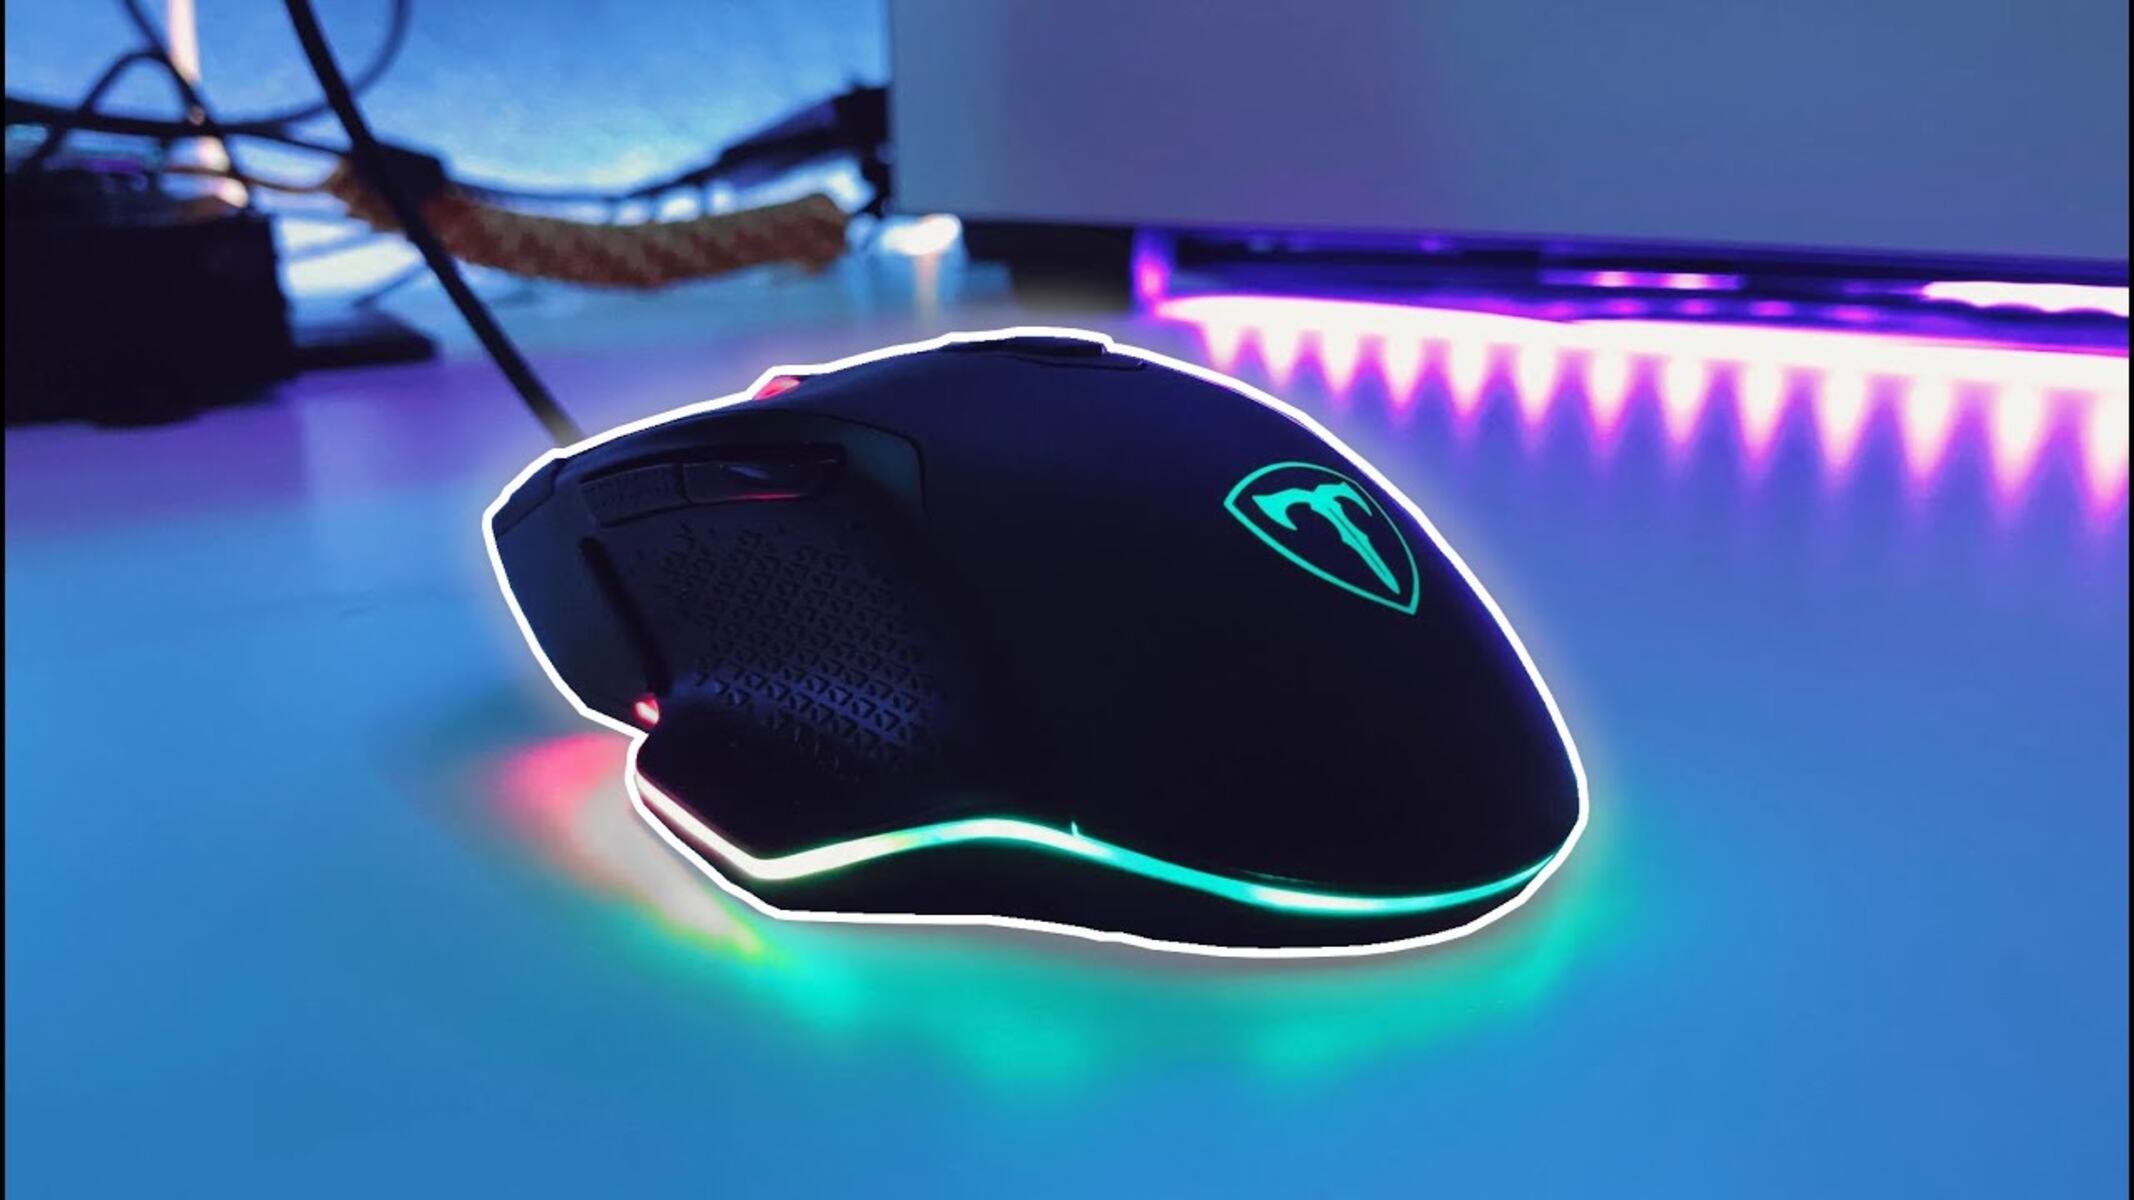 How To Customize Picteck Gaming Mouse